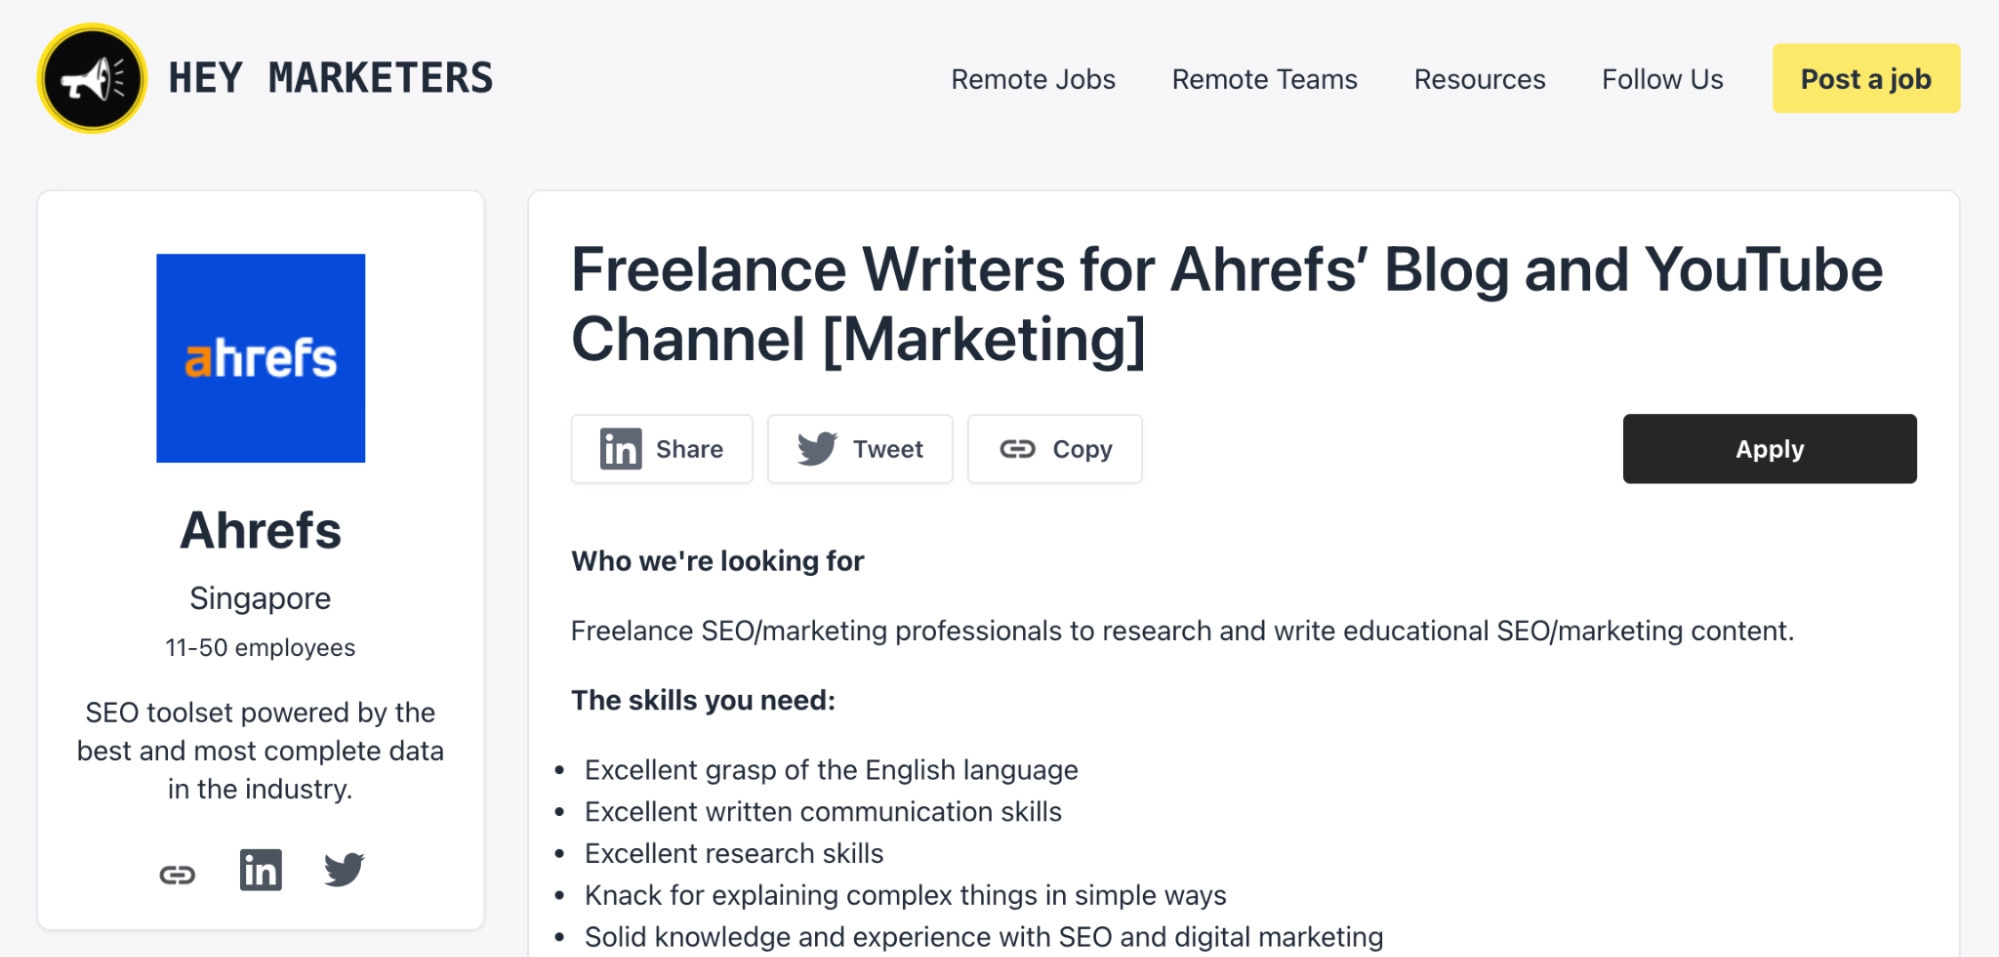 3-job-board How to Hire Freelance Writers in 5 Steps (Ahrefs' Process)